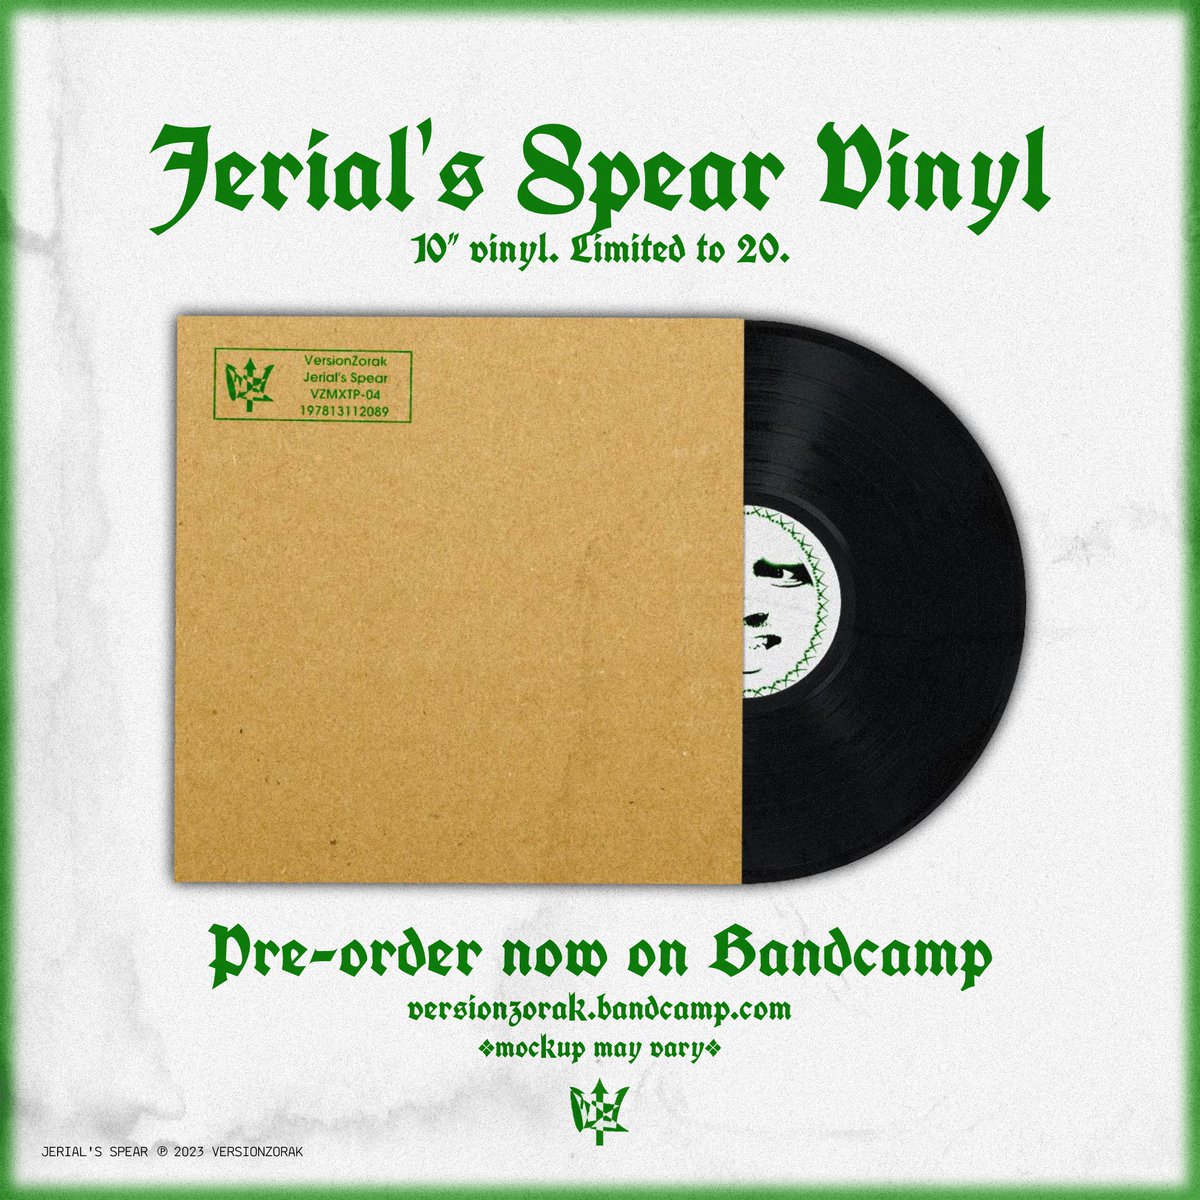 Jerial's Spear Vinyl.
10' vinyl. Limited to 20.
Pre-order now. Estimated to ship on late July-August.
Going to warn you.. Don't sleep!!!!!

versionzorak.bandcamp.com/album/jerials-…
#vinyl #vinylreleases